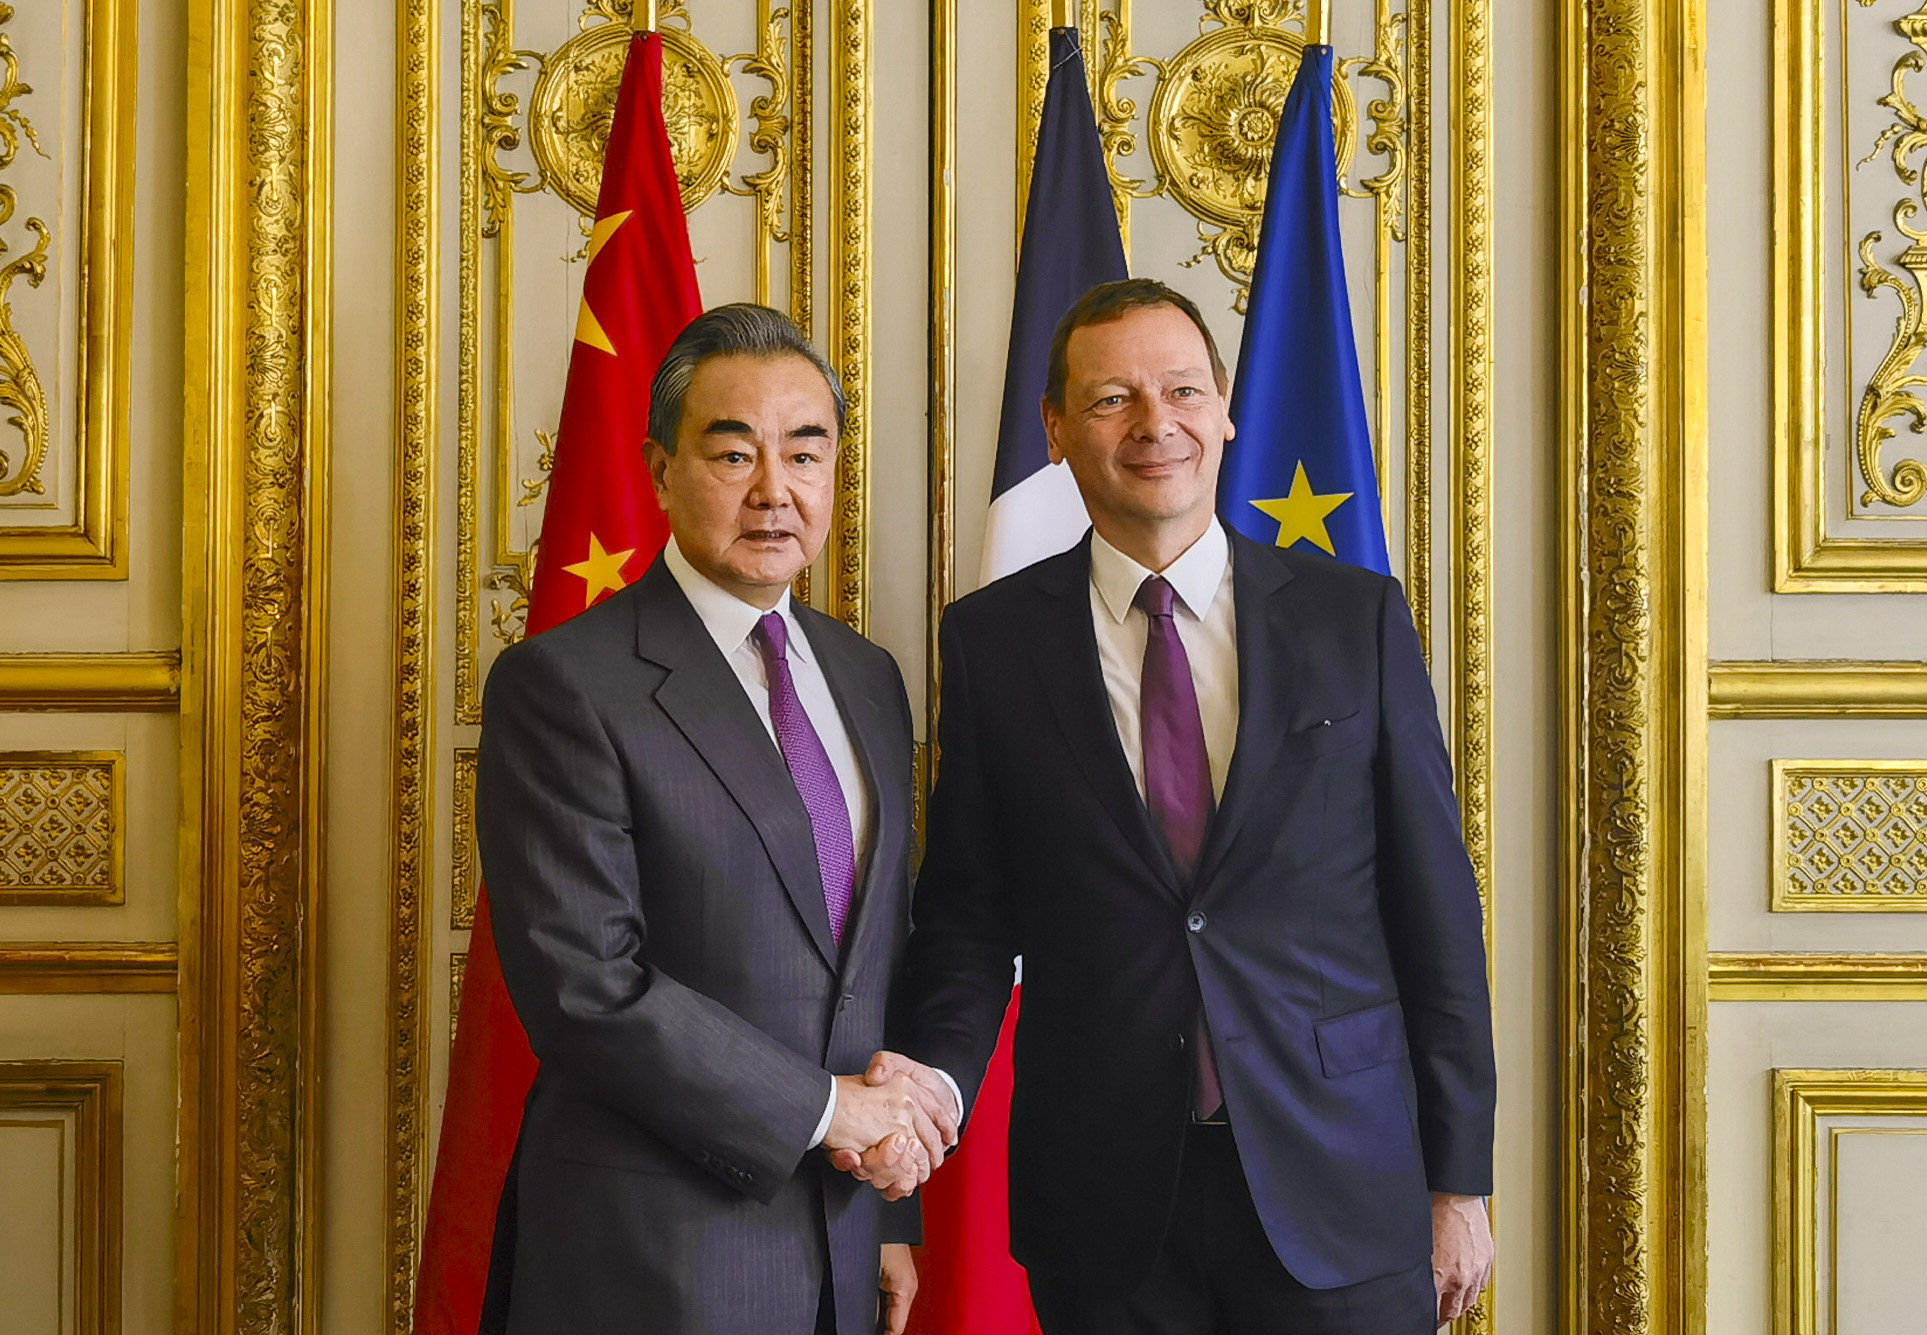 China’s top diplomat Wang Yi shakes hands with Emmanuel Bonne, diplomatic counsellor to the French president, in Paris on Thursday. Photo: Xinhua